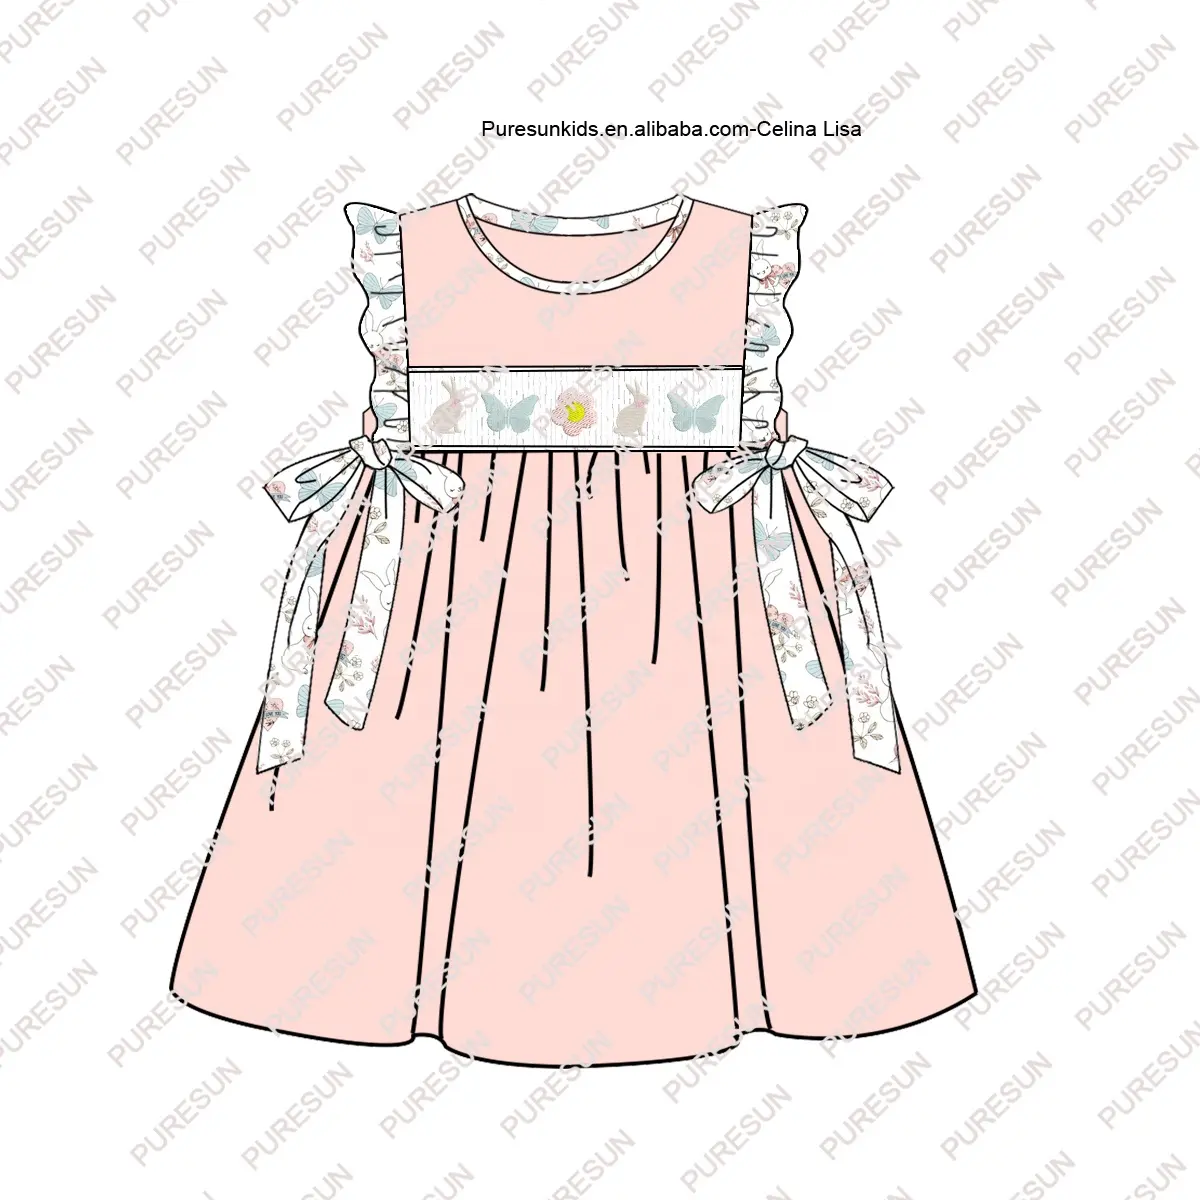 PURESUN customized boutique Easter smocked children clothing sleeves ruffle baby girl cotton dress with bunny flower embroidery